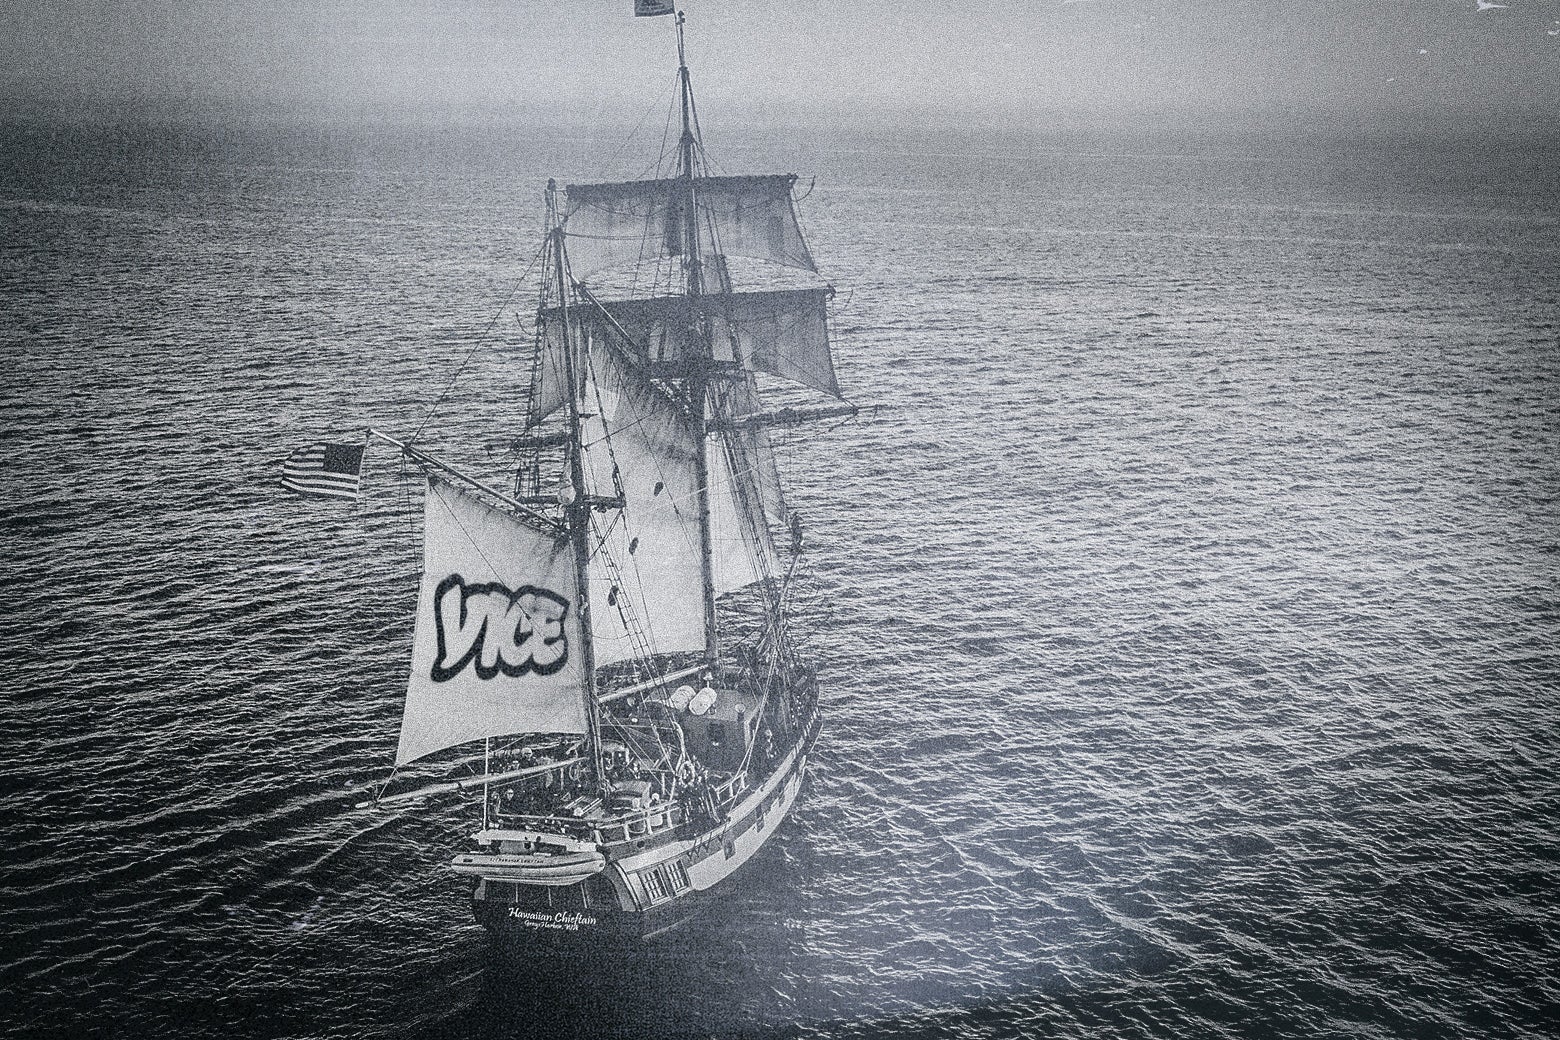 A ghost ship with the Vice logo on its sails.